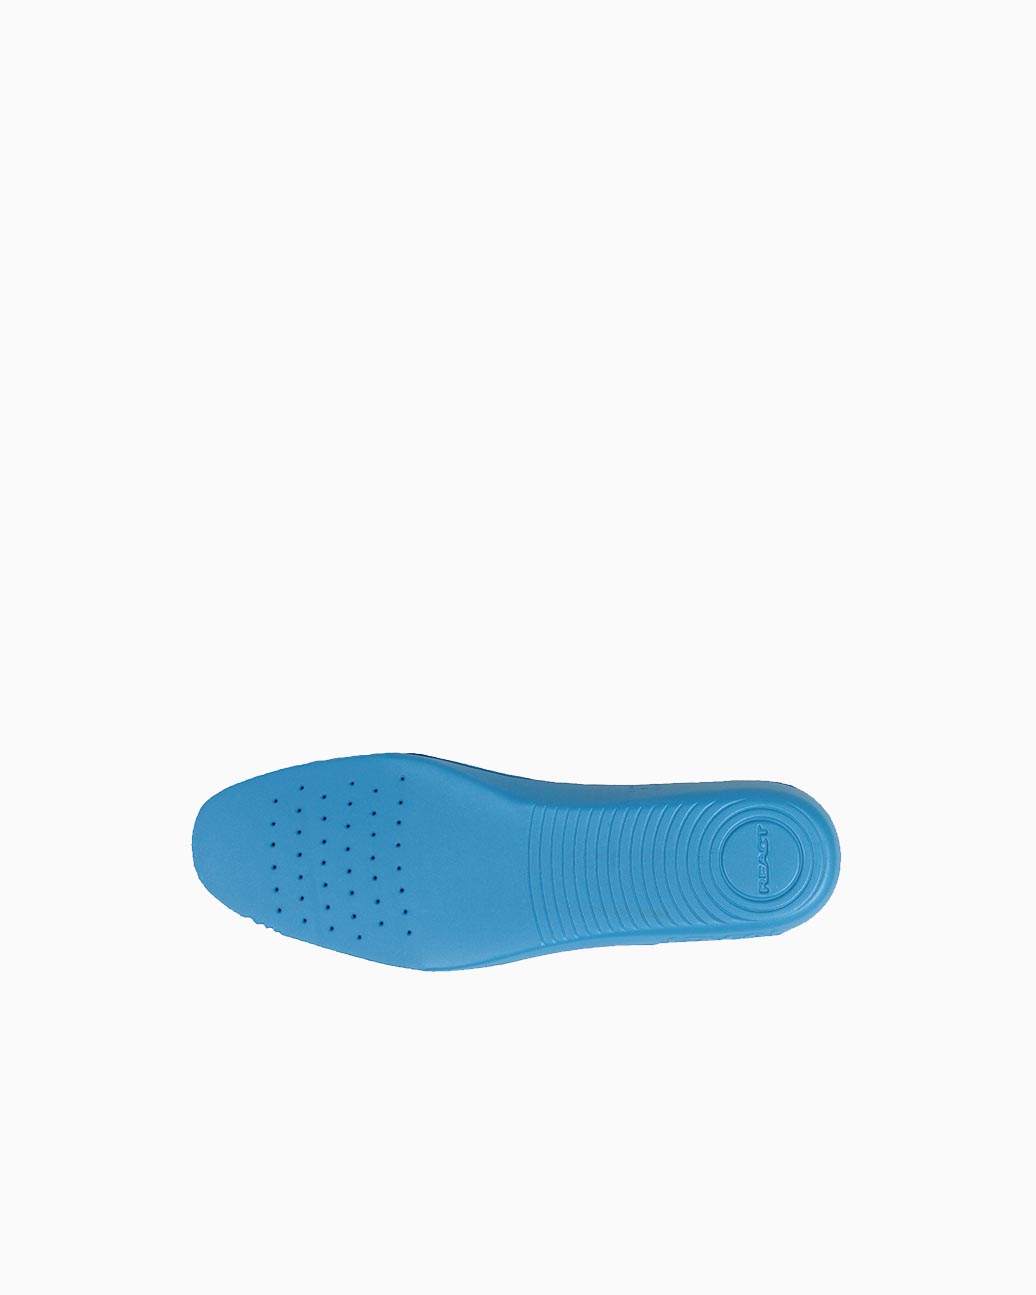 REACT HD CUP INSOLE